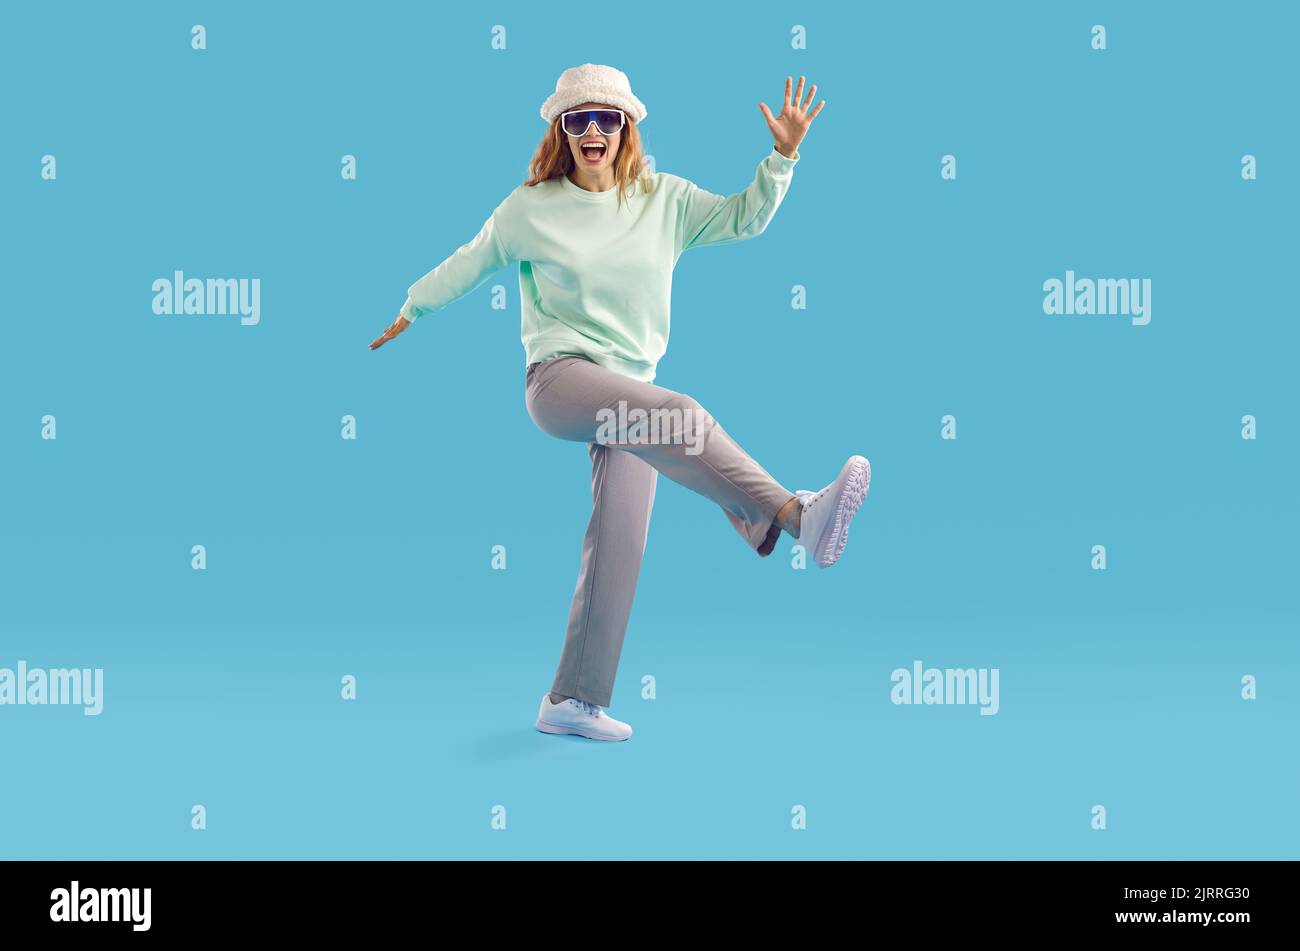 Funny woman in sweatshirt, trousers, bucket hat and sunglasses dancing on blue studio background Stock Photo